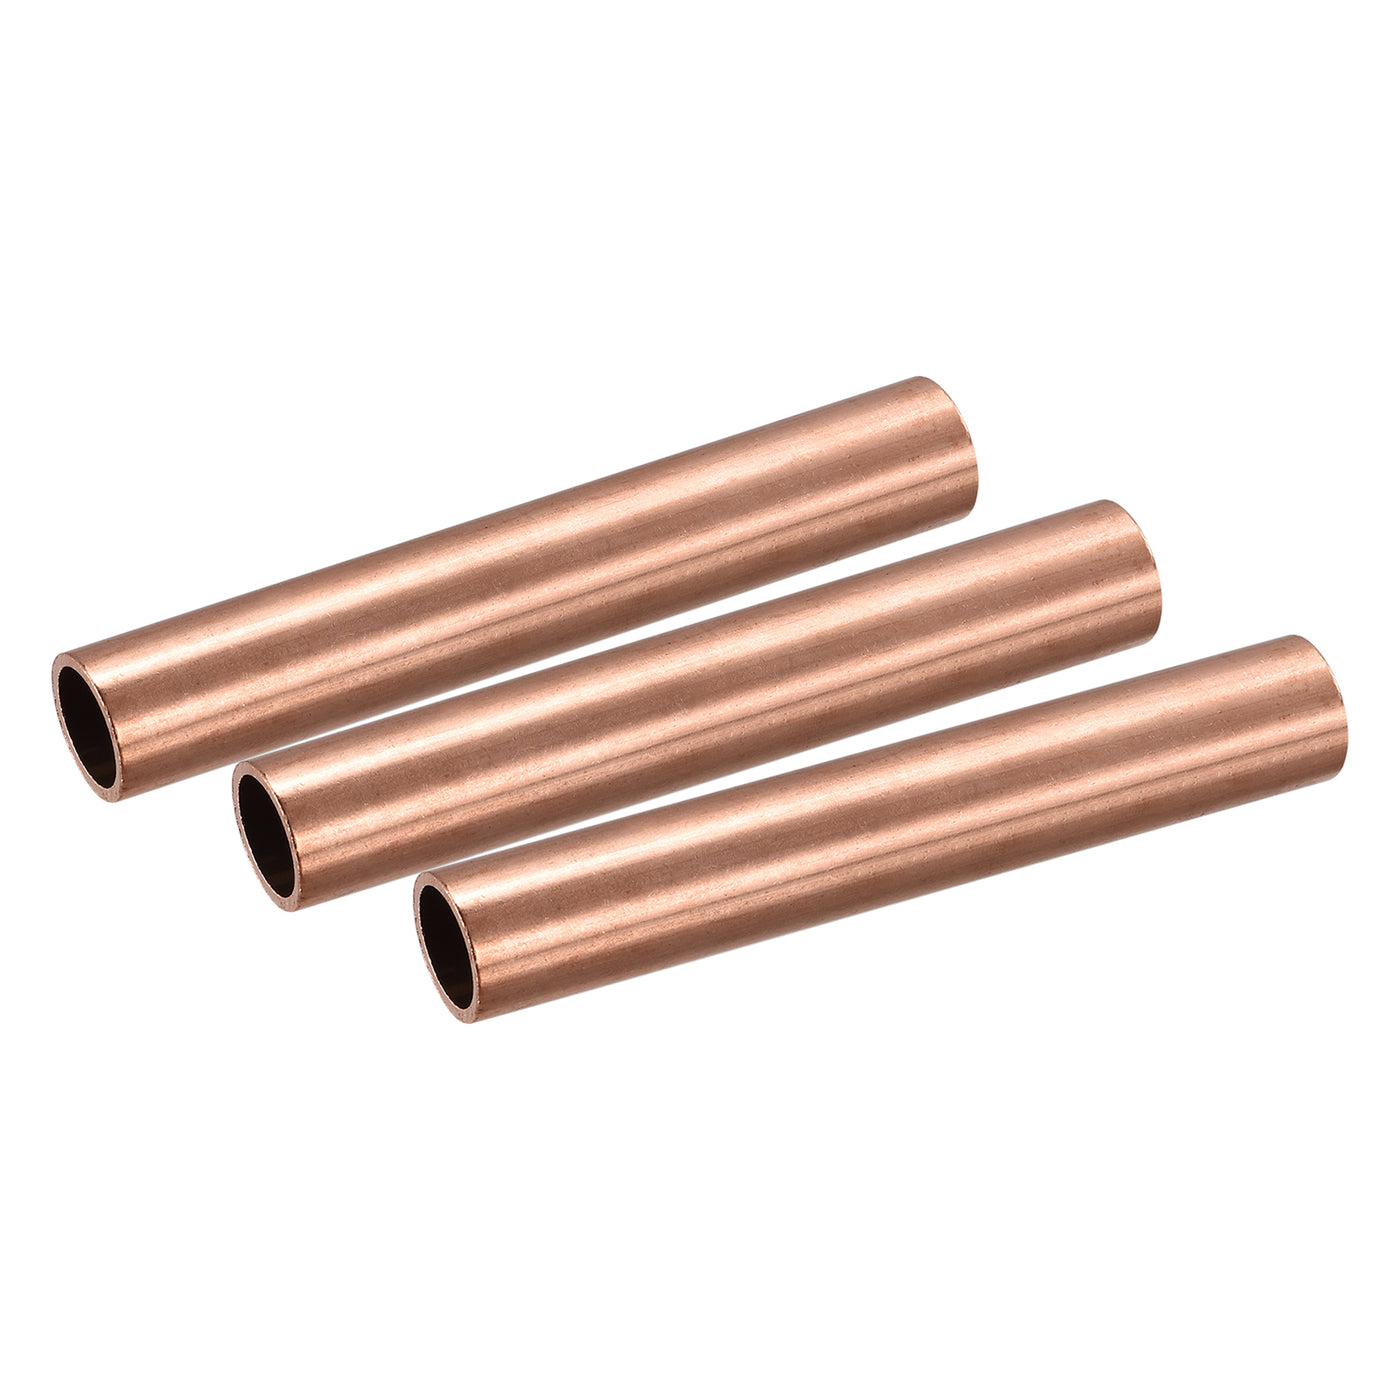 uxcell Uxcell Copper Round Tube 17mm OD 1.5mm Wall Thickness 100mm Length Pipe Tubing 3 Pcs